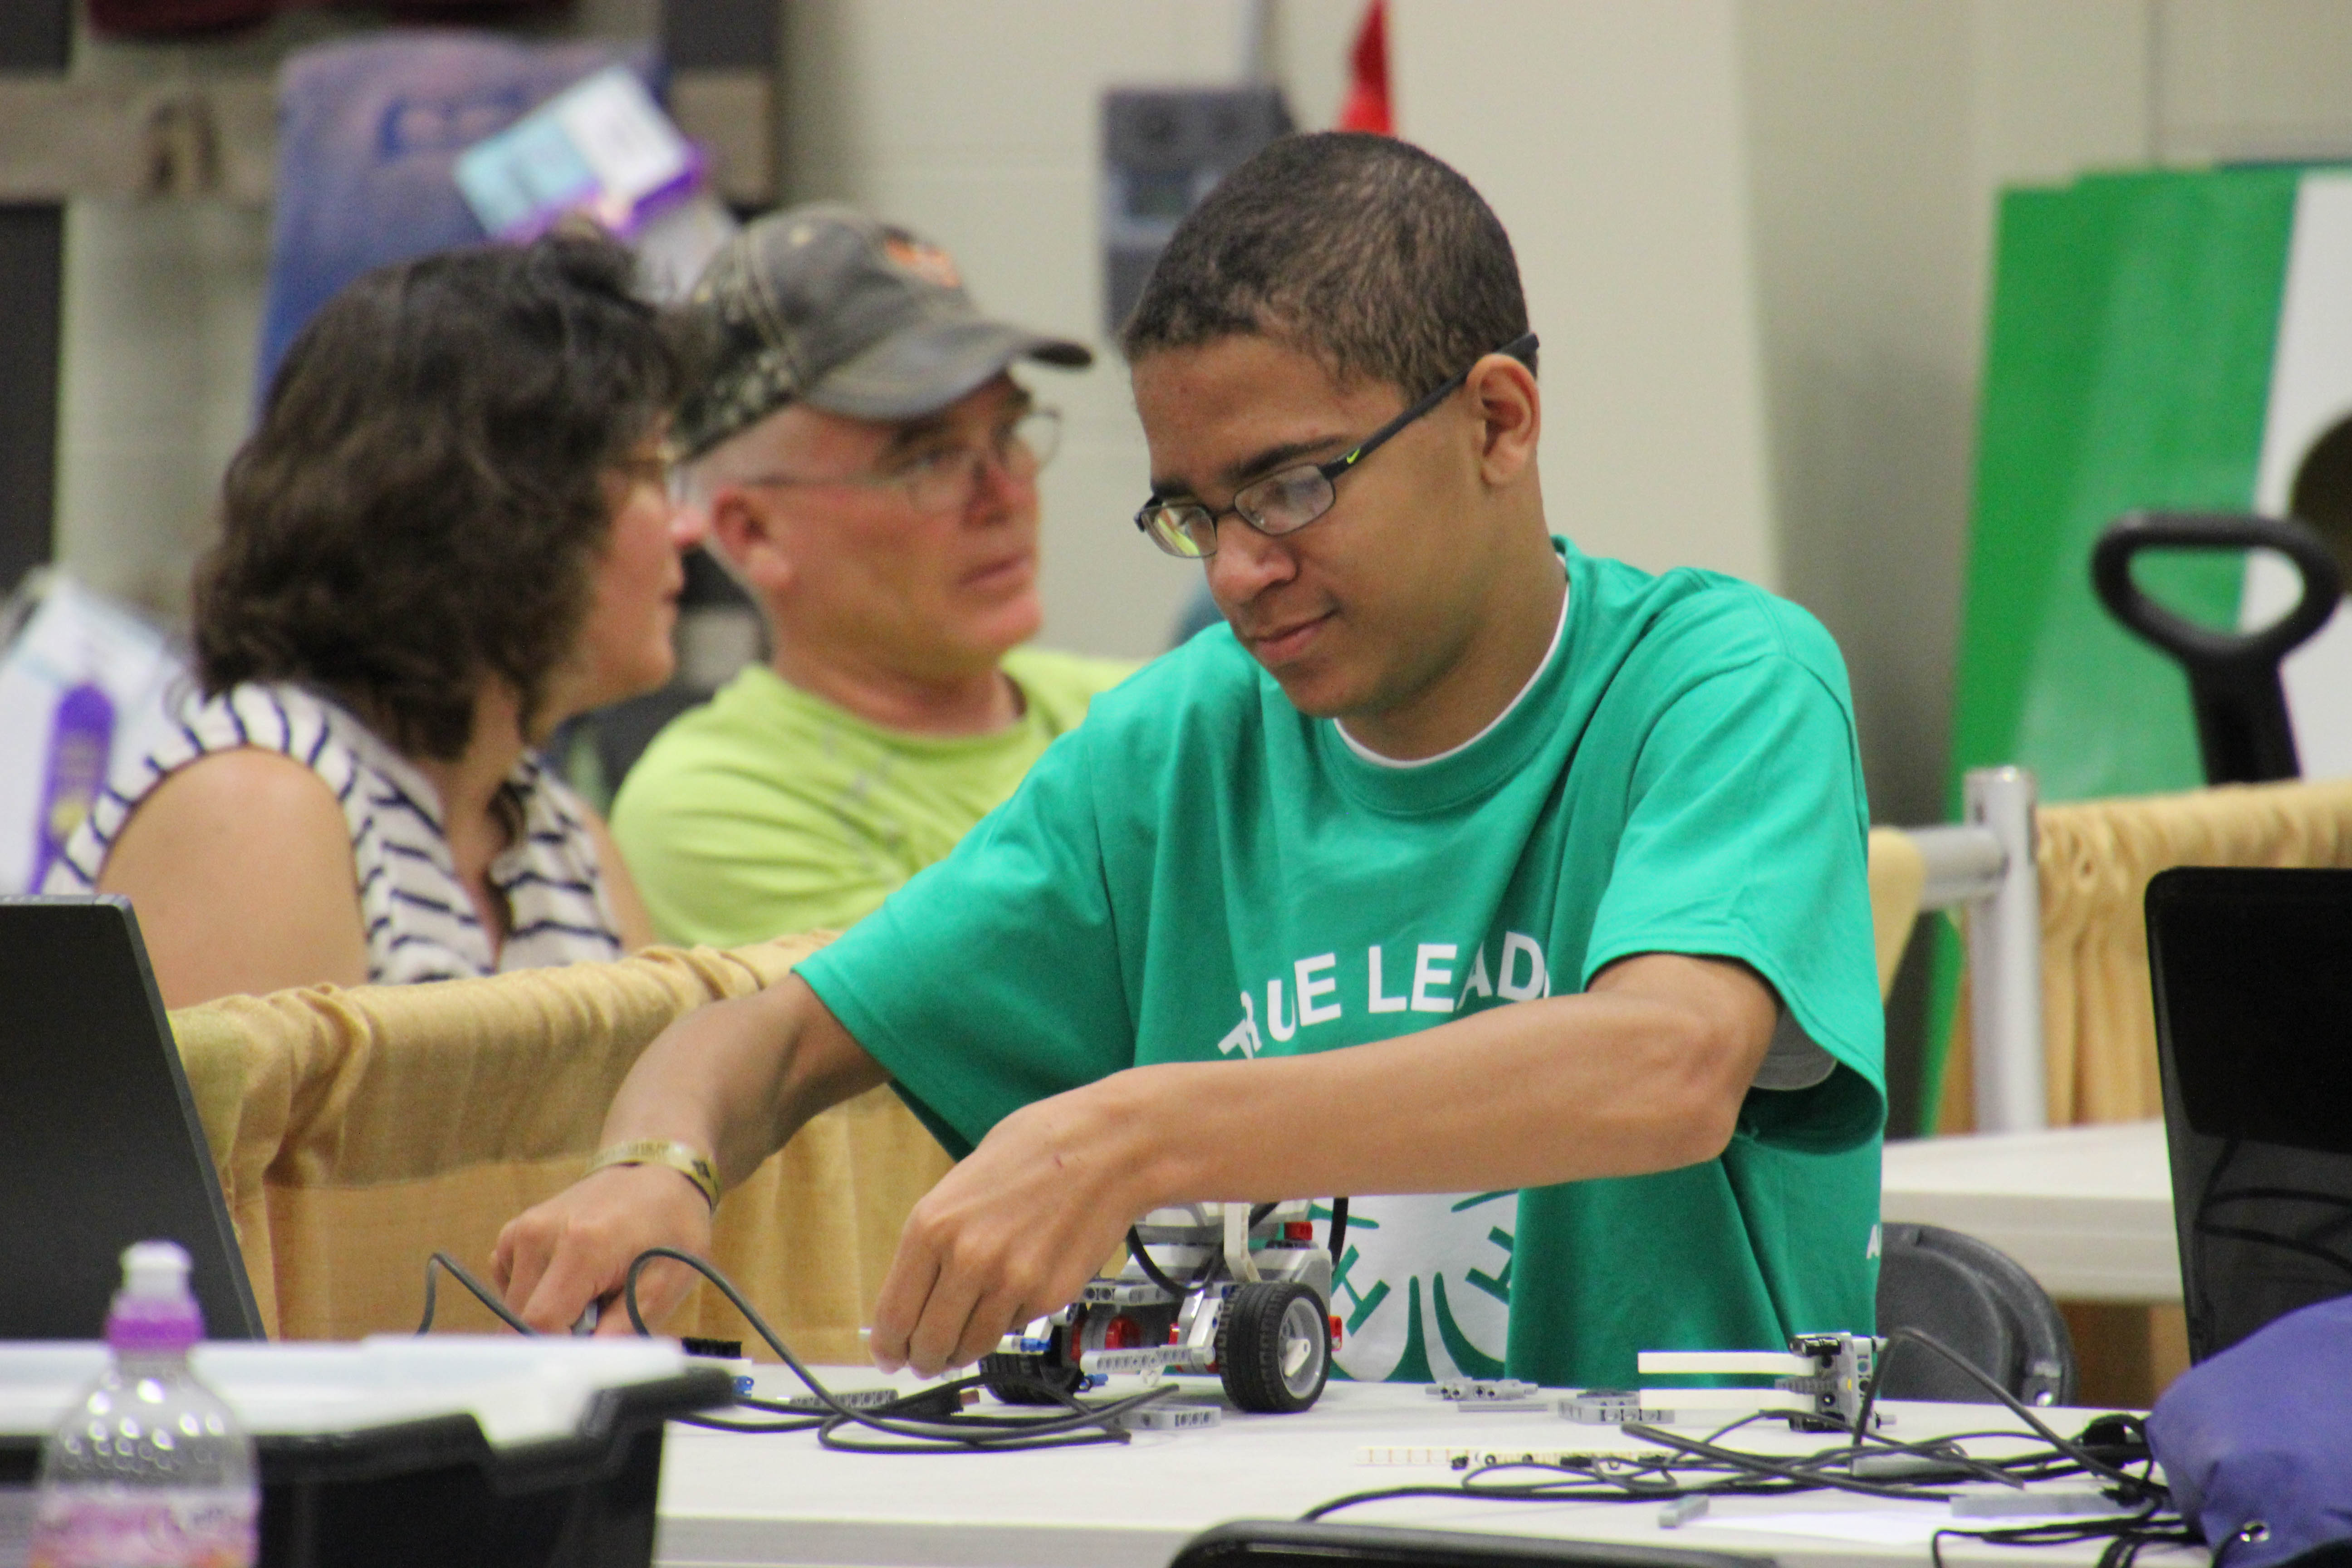 4-H member working on a robotics project